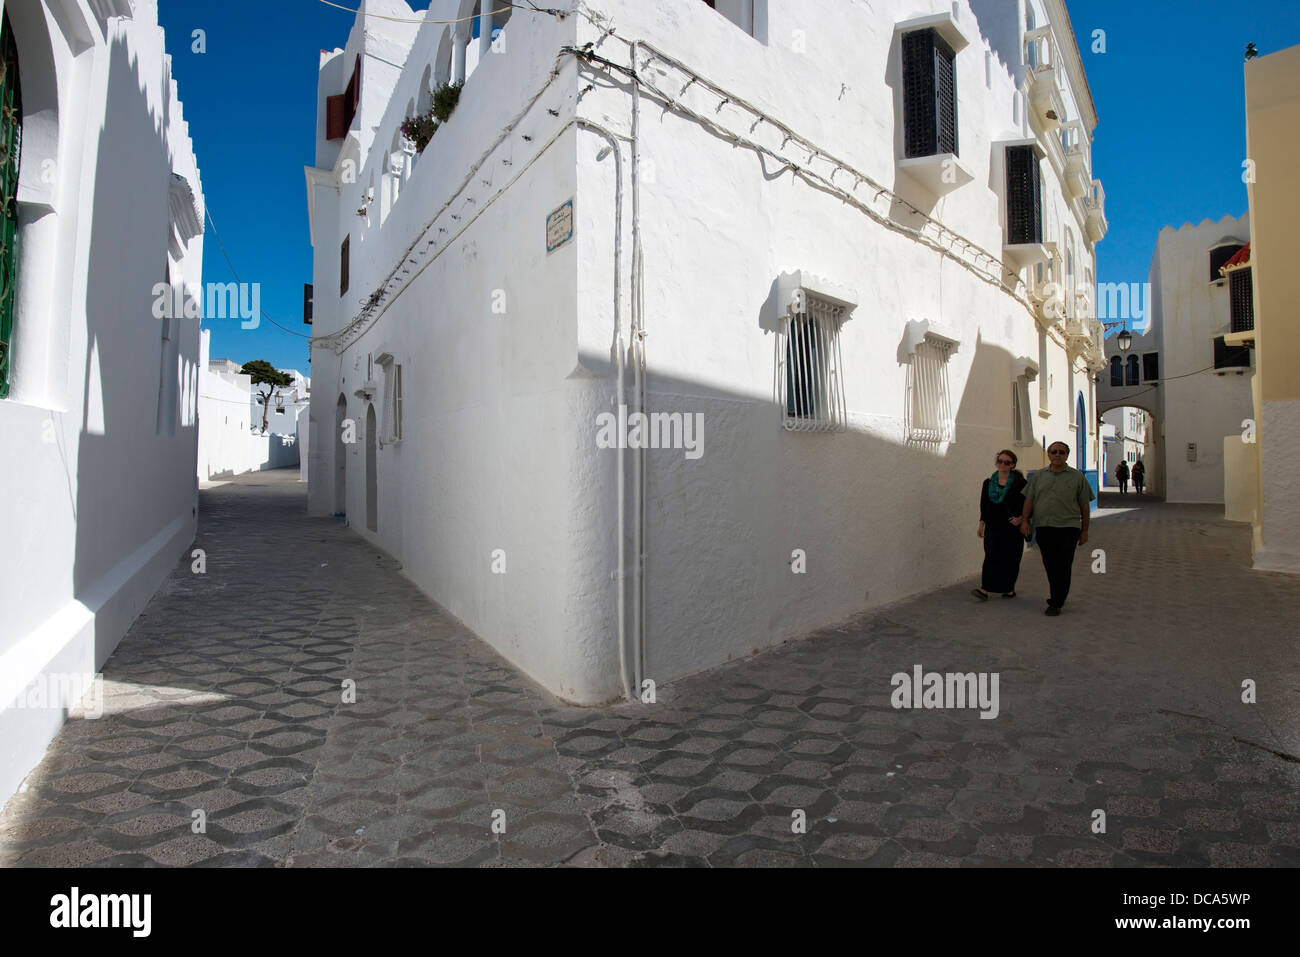 A man and woman walk down a street in the coastal town of Asilah, Morocco. Stock Photo